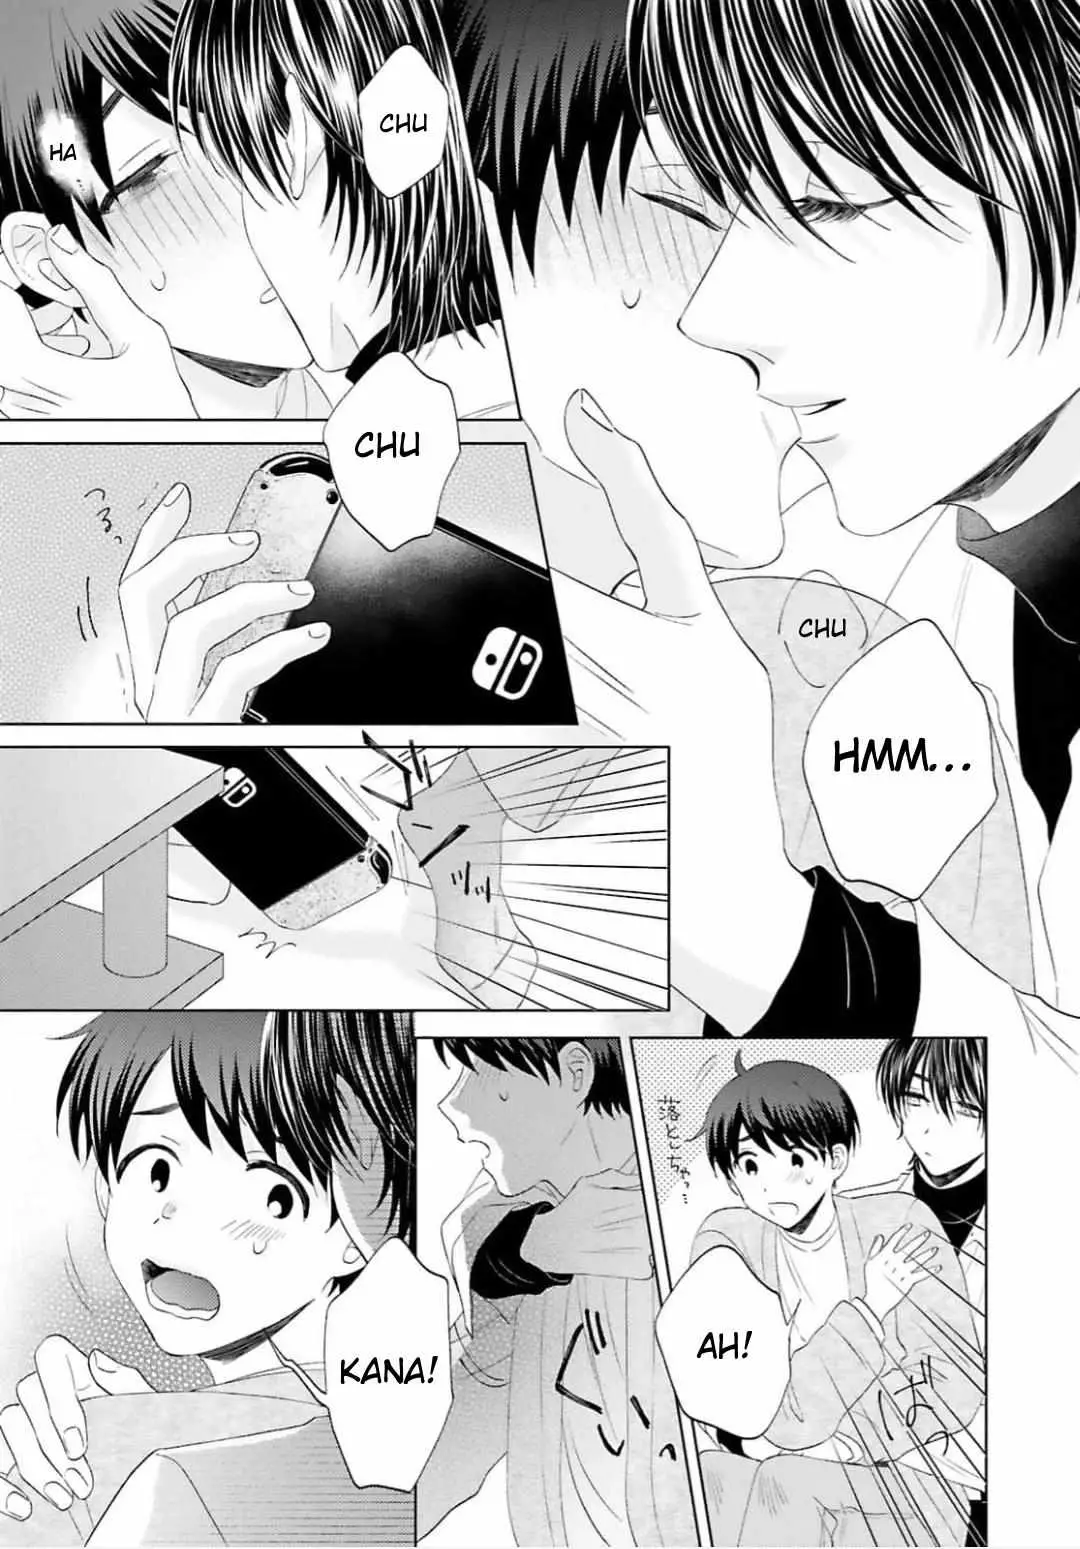 My Cutie Pie -An Ordinary Boy And His Gorgeous Childhood Friend- 〘Official〙 - 11 page 3-e6a523b9